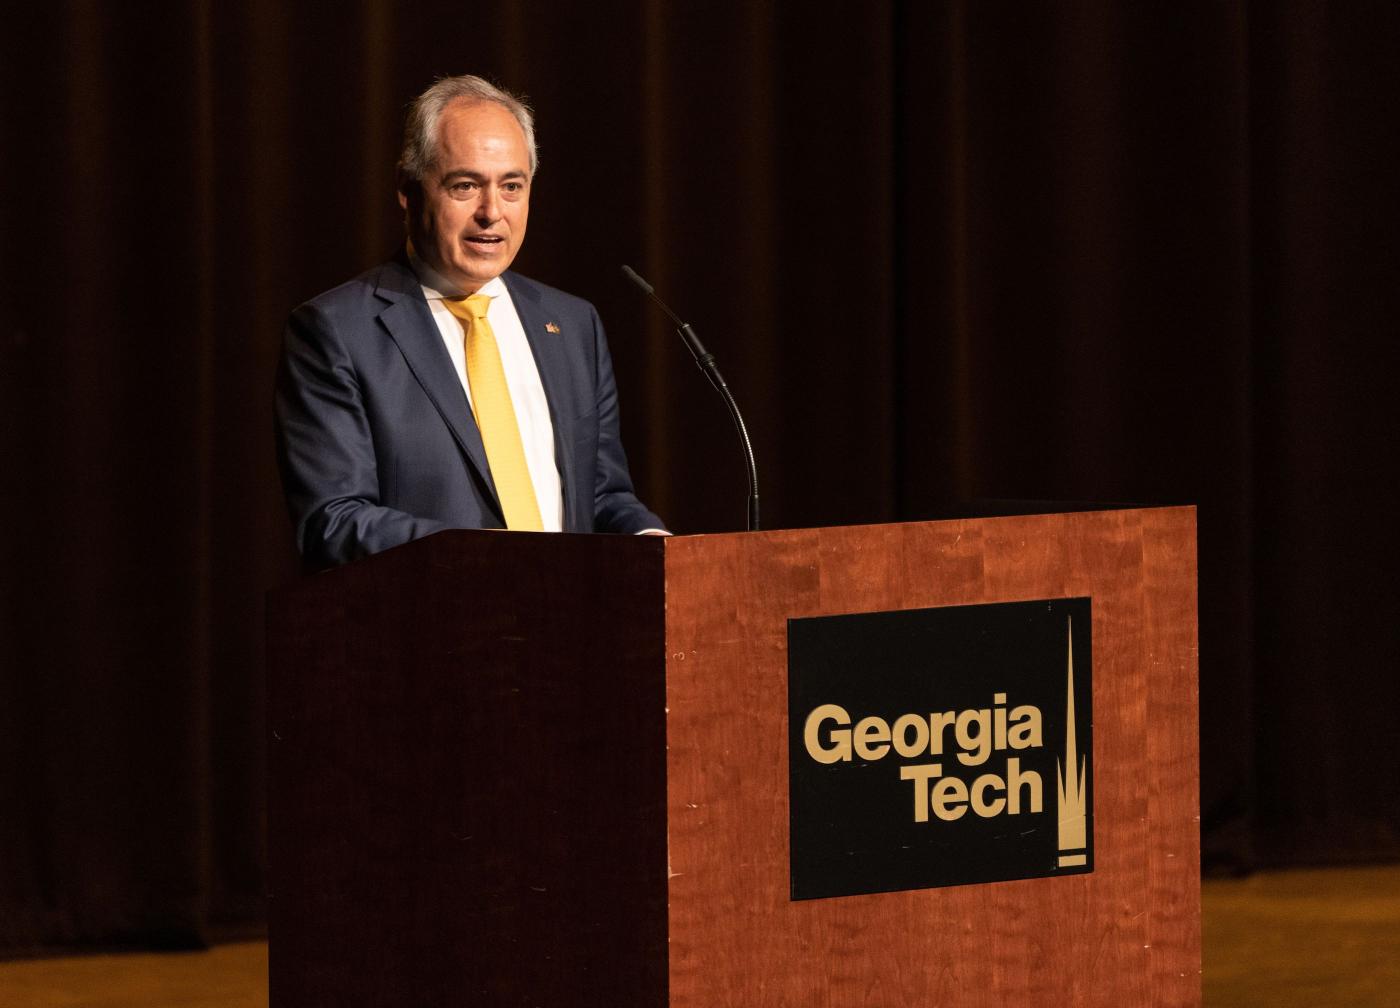 Ángel Cabrera stands at a lectern with a Georgia Tech logo on it to address an audience.